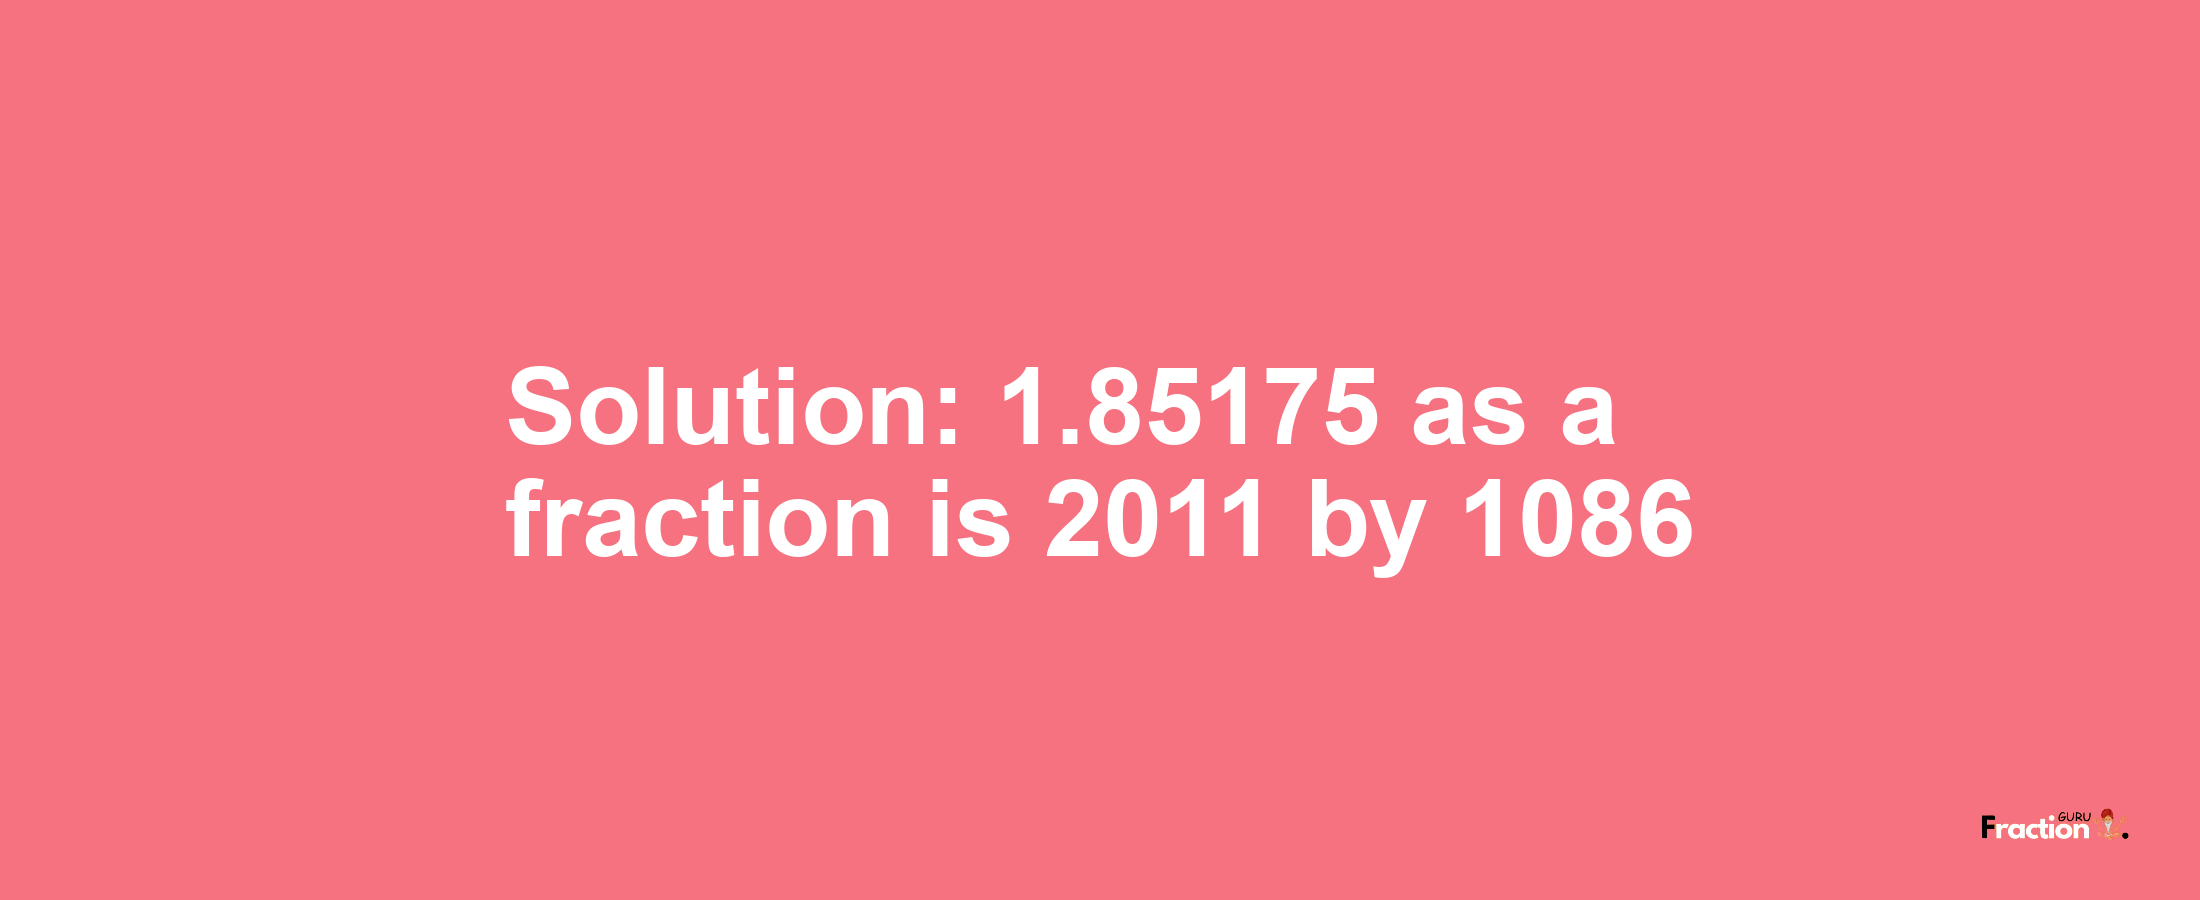 Solution:1.85175 as a fraction is 2011/1086